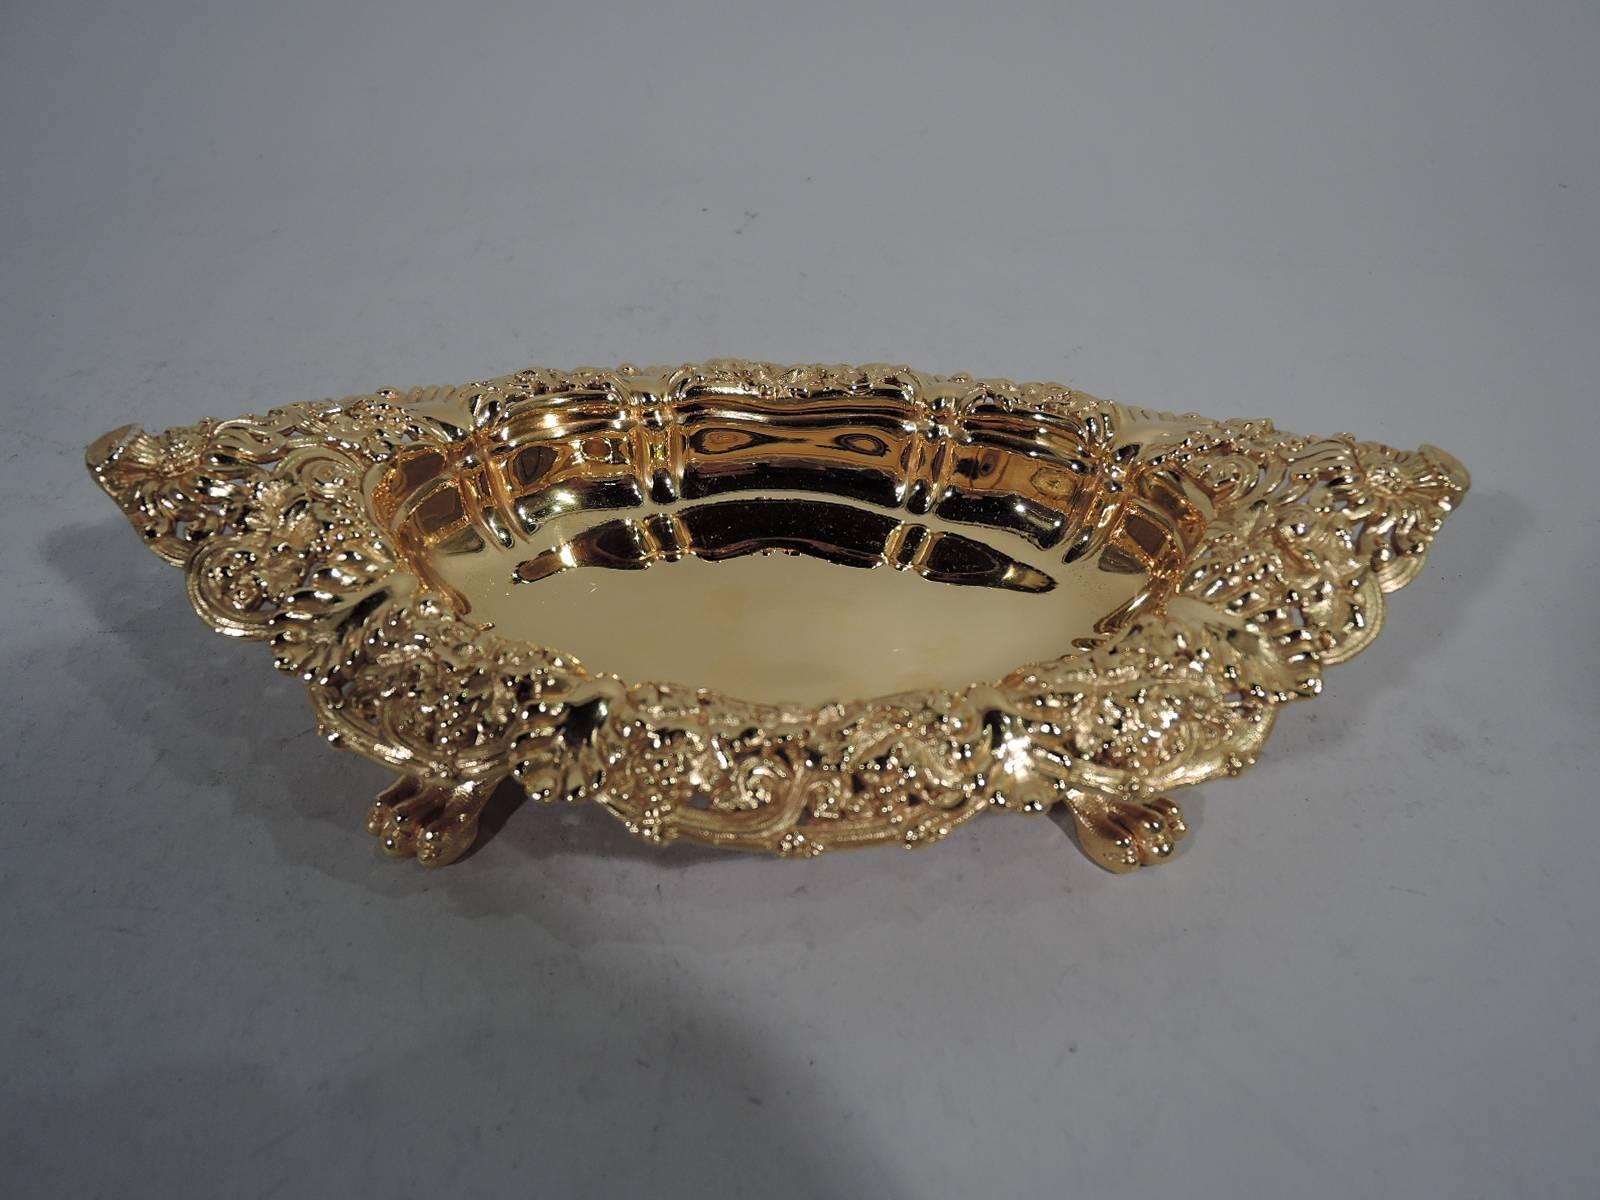 Pair of gilt sterling silver footed bowls. Made by Tiffany & Co. in New York, circa 1884. Each: Panelled ovalish well and scrolled and pierced turned-down rim with flowers, berries, and leaves. Rests on four foliate-scroll mounted paws. Substantial